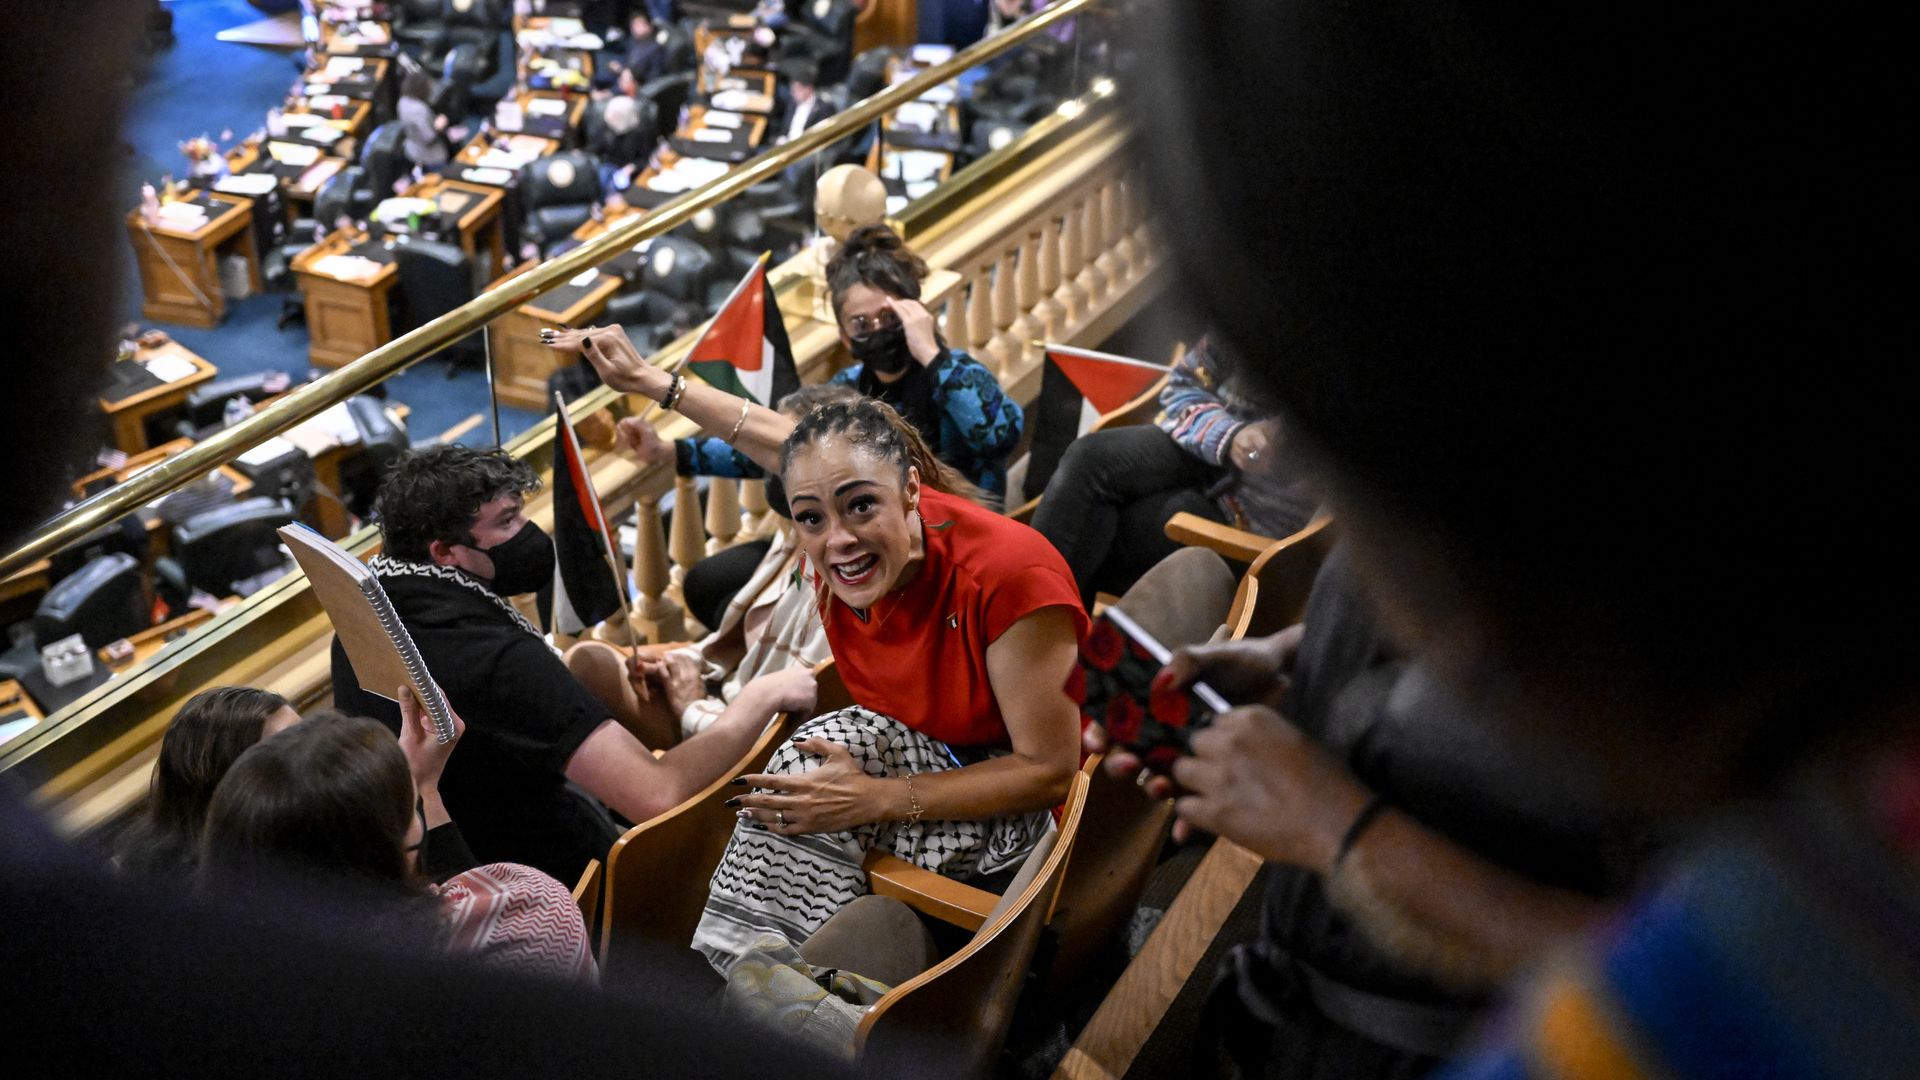 Rep. Elisabeth Epps sits in the House balcony in protest during a special session at the Colorado Capitol on Nov. 20. Photo: AAron Ontiveroz/The Denver Post